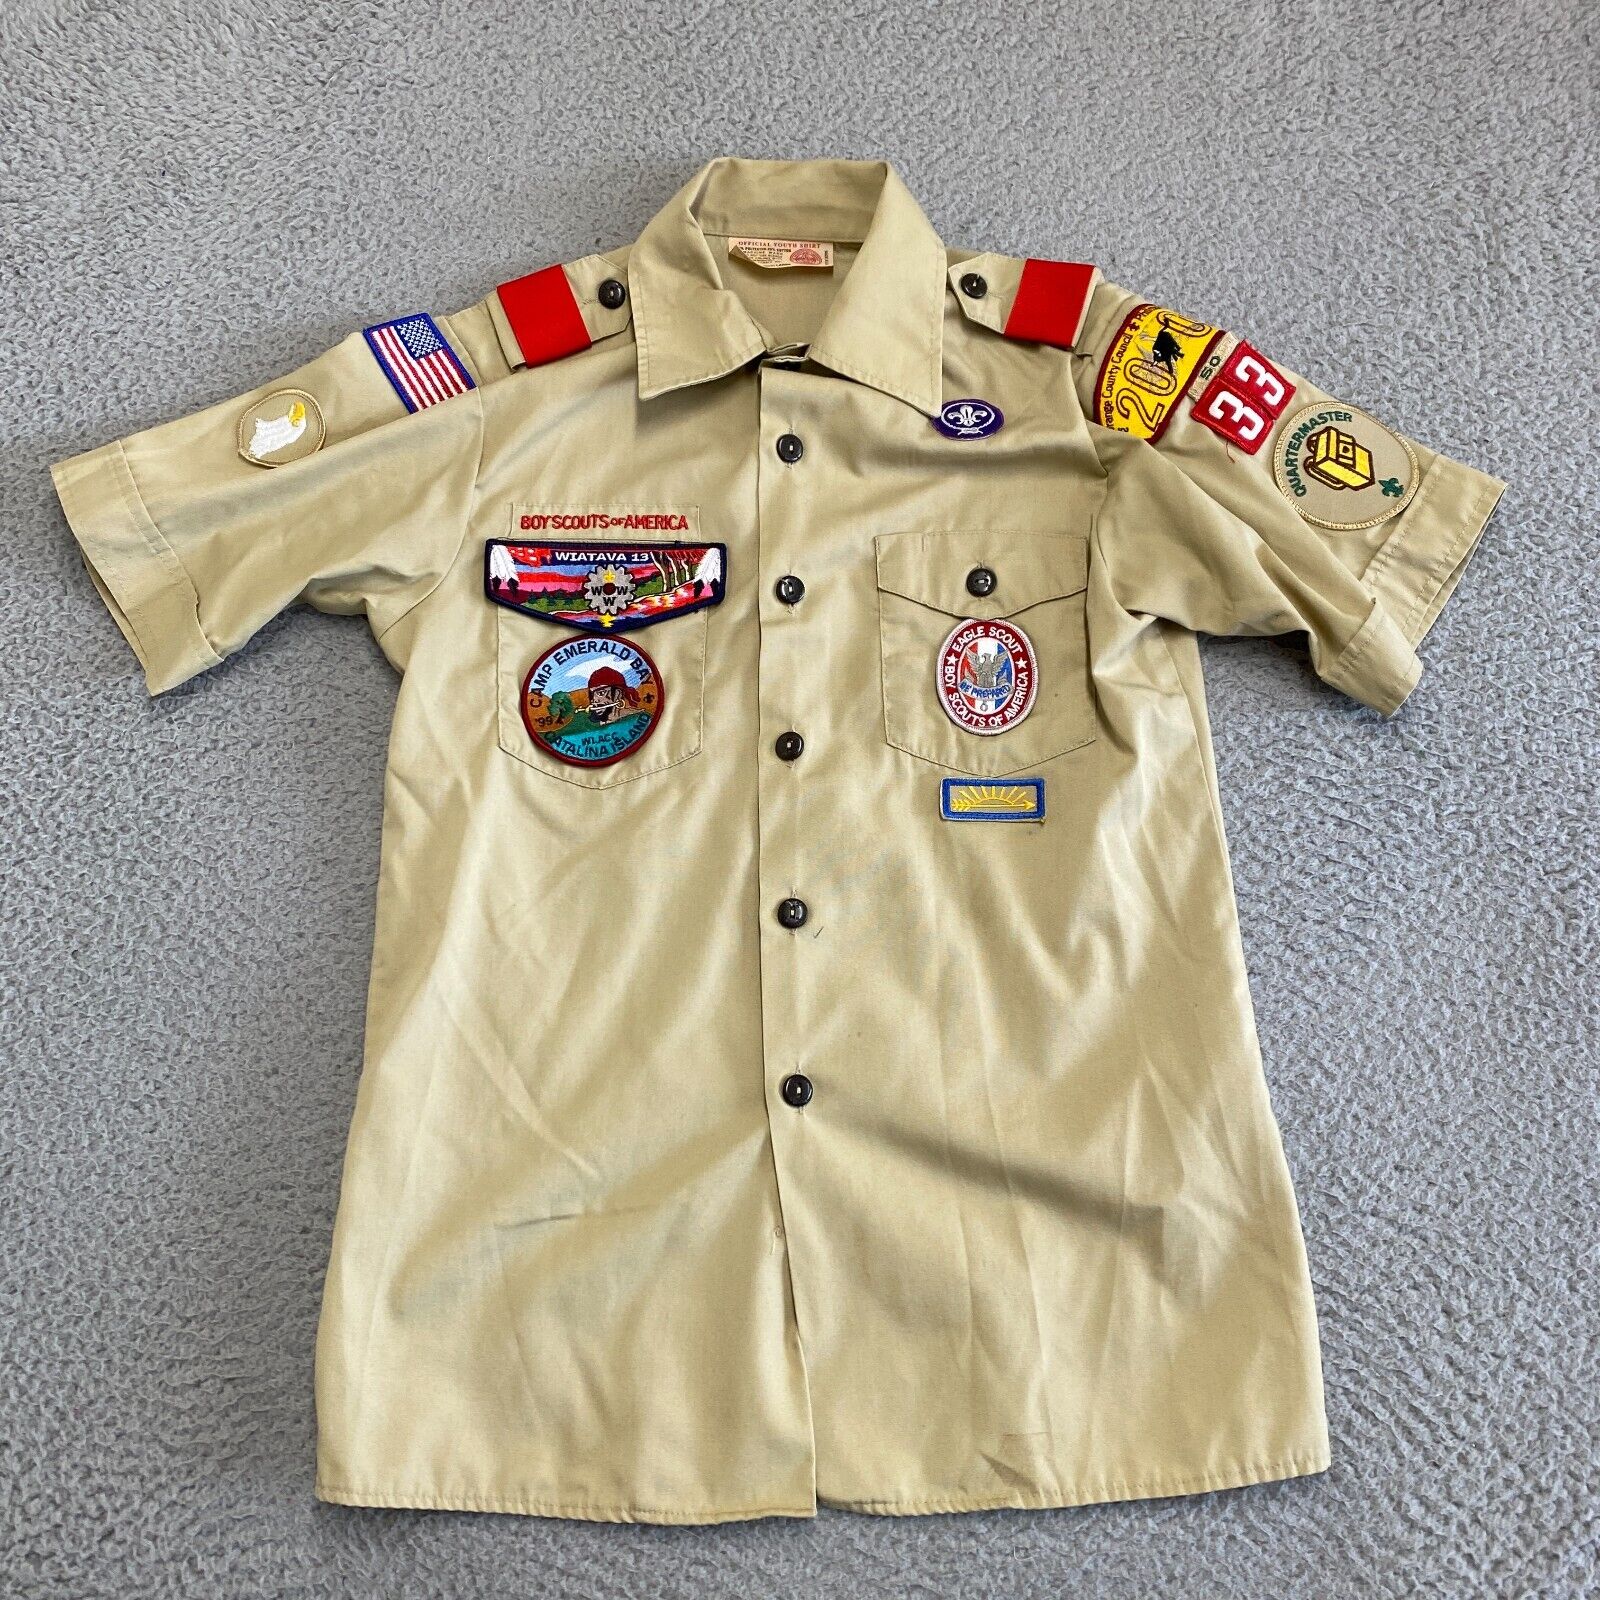 Boy Scout Shirt Youth Large Eagle Scout Patches Orange County California 2005